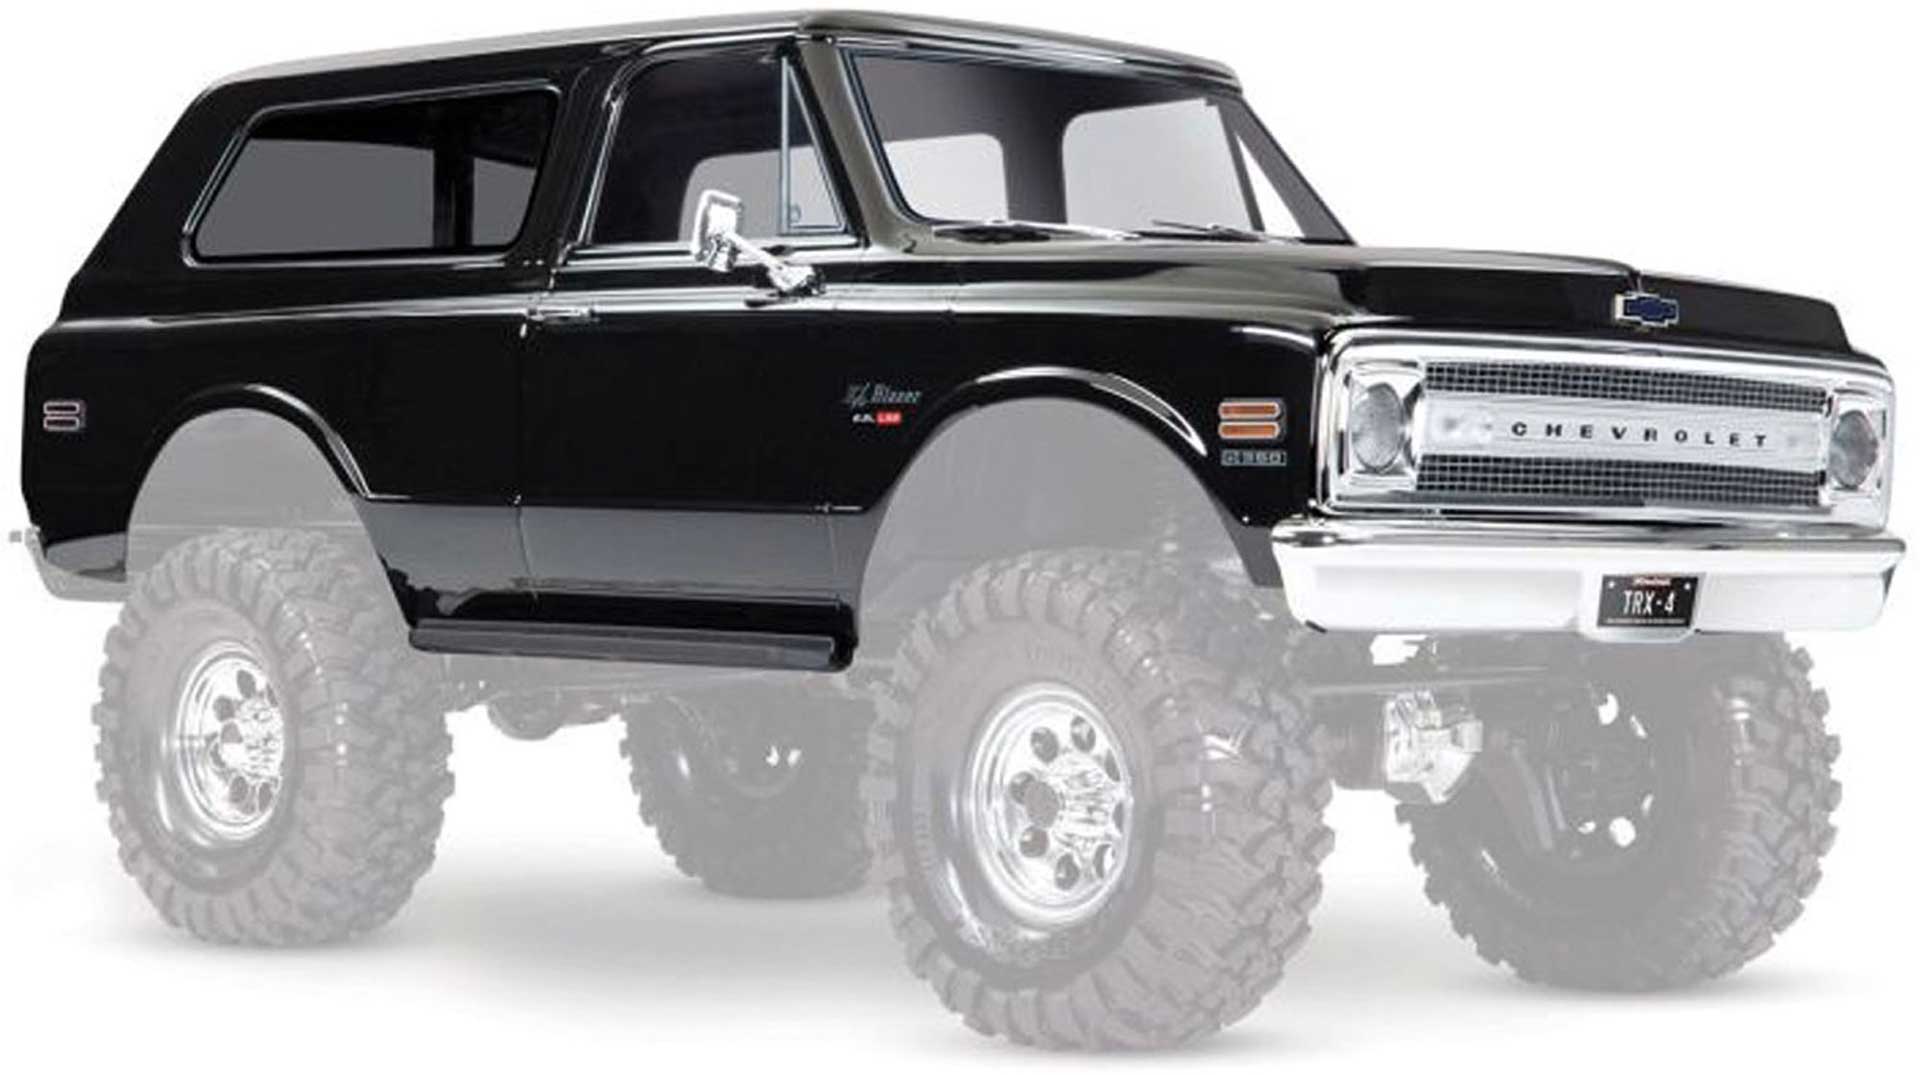 TRAXXAS BODY Chevrolet Blazer 1969 black (complete with add-on parts)